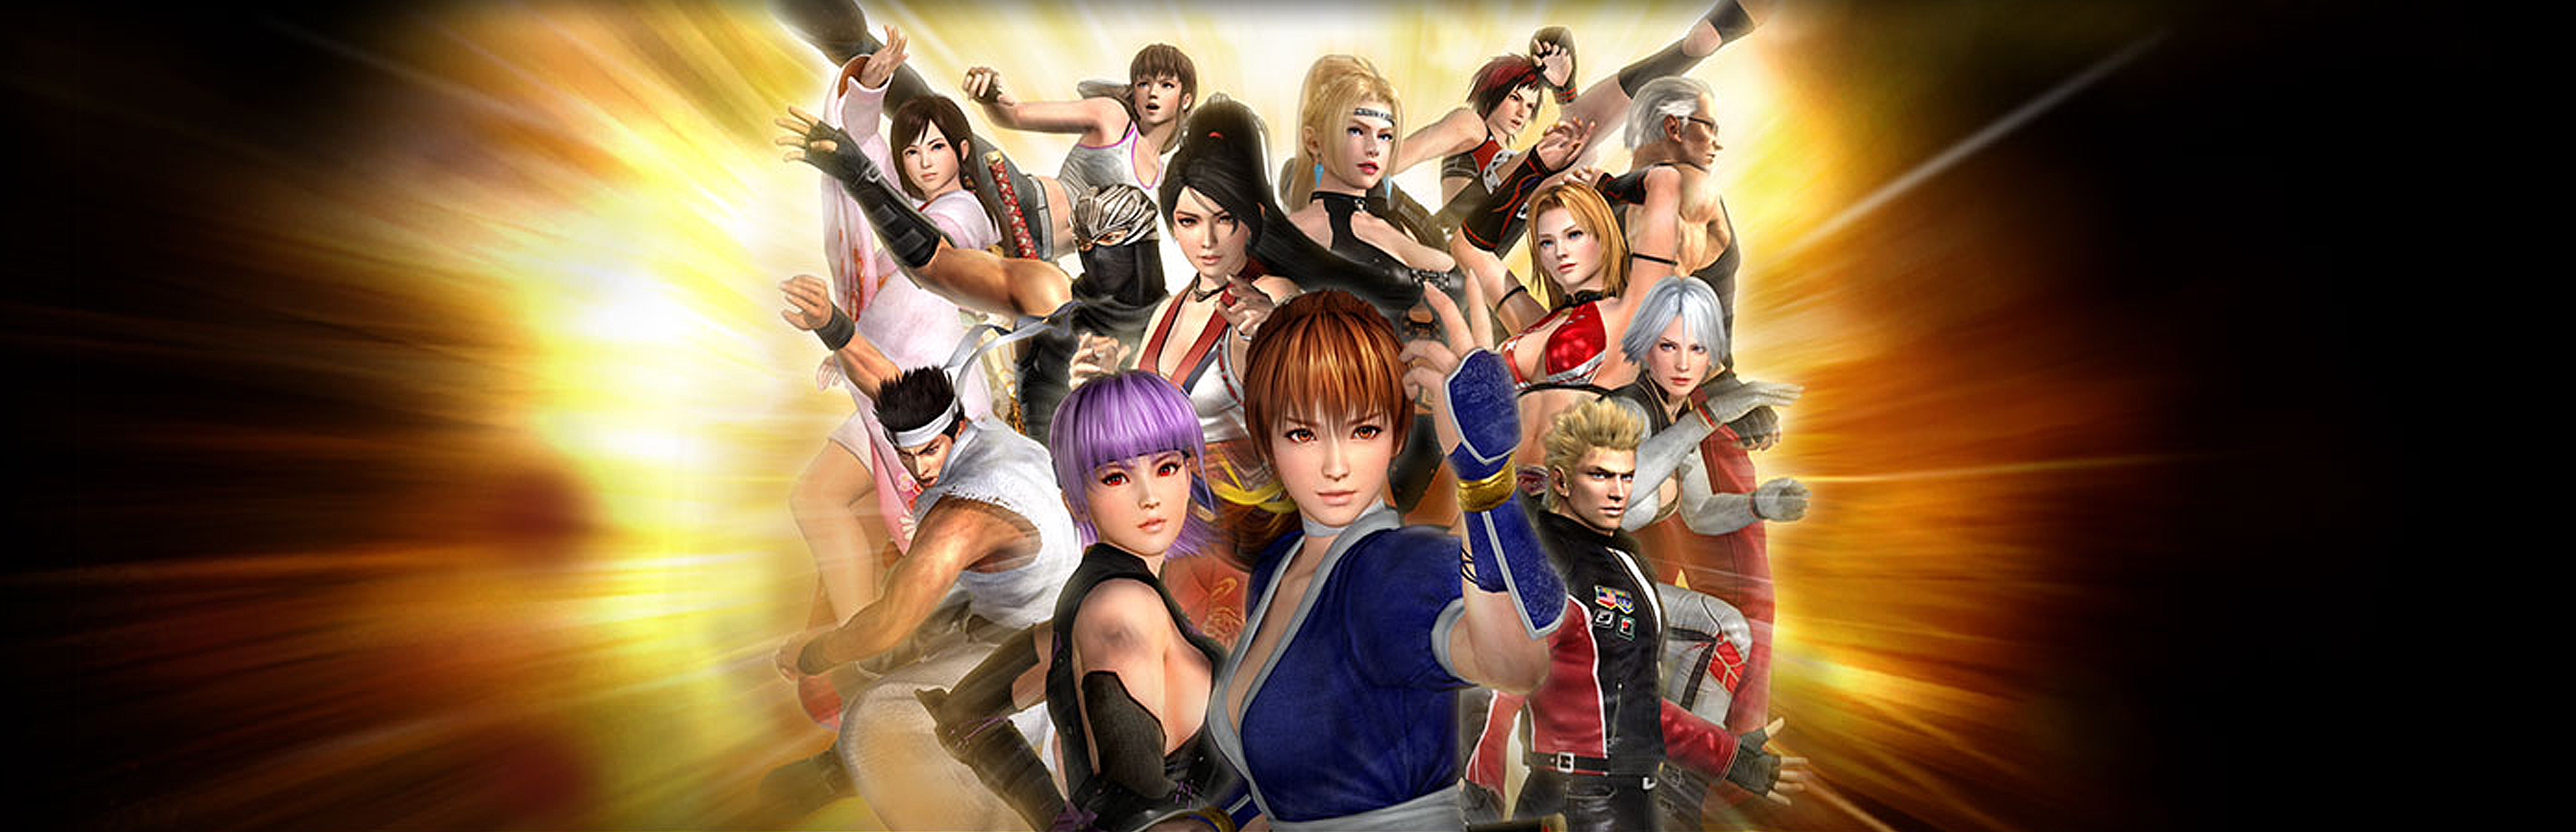 Dead Or Alive 5 Wallpapers  Wallpaper Cave